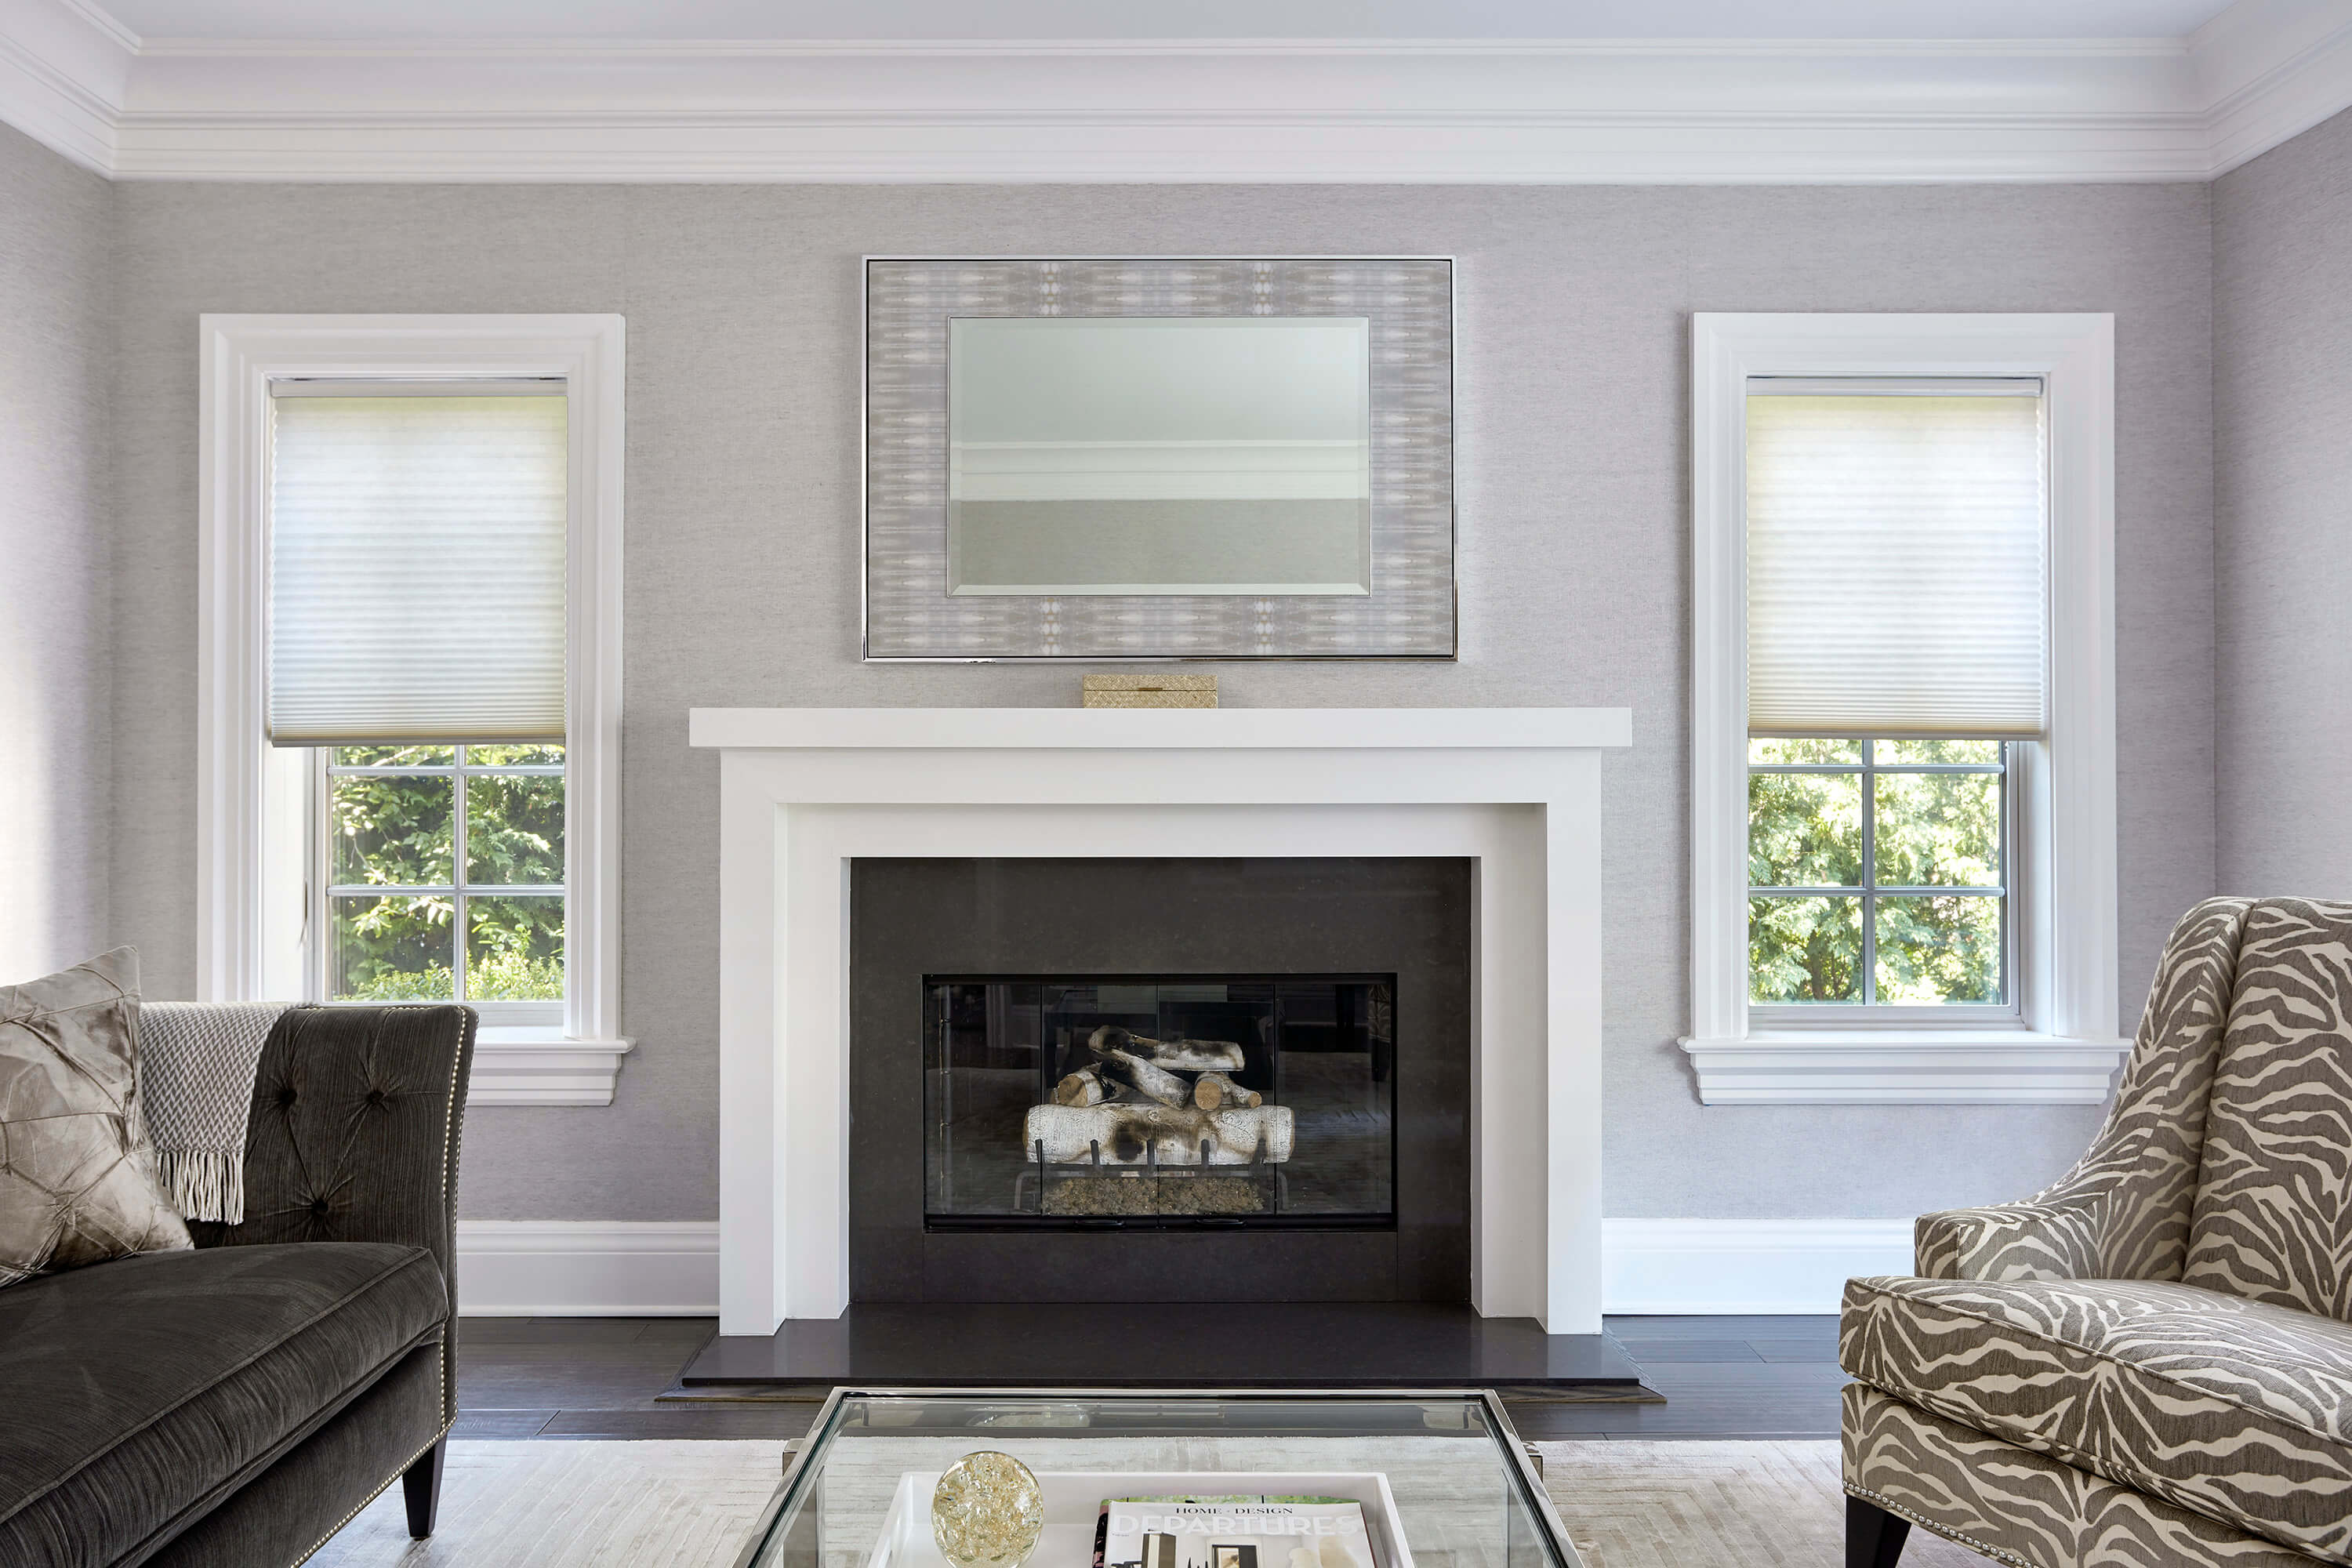 These custom cellular shades provides a clean and finished look.